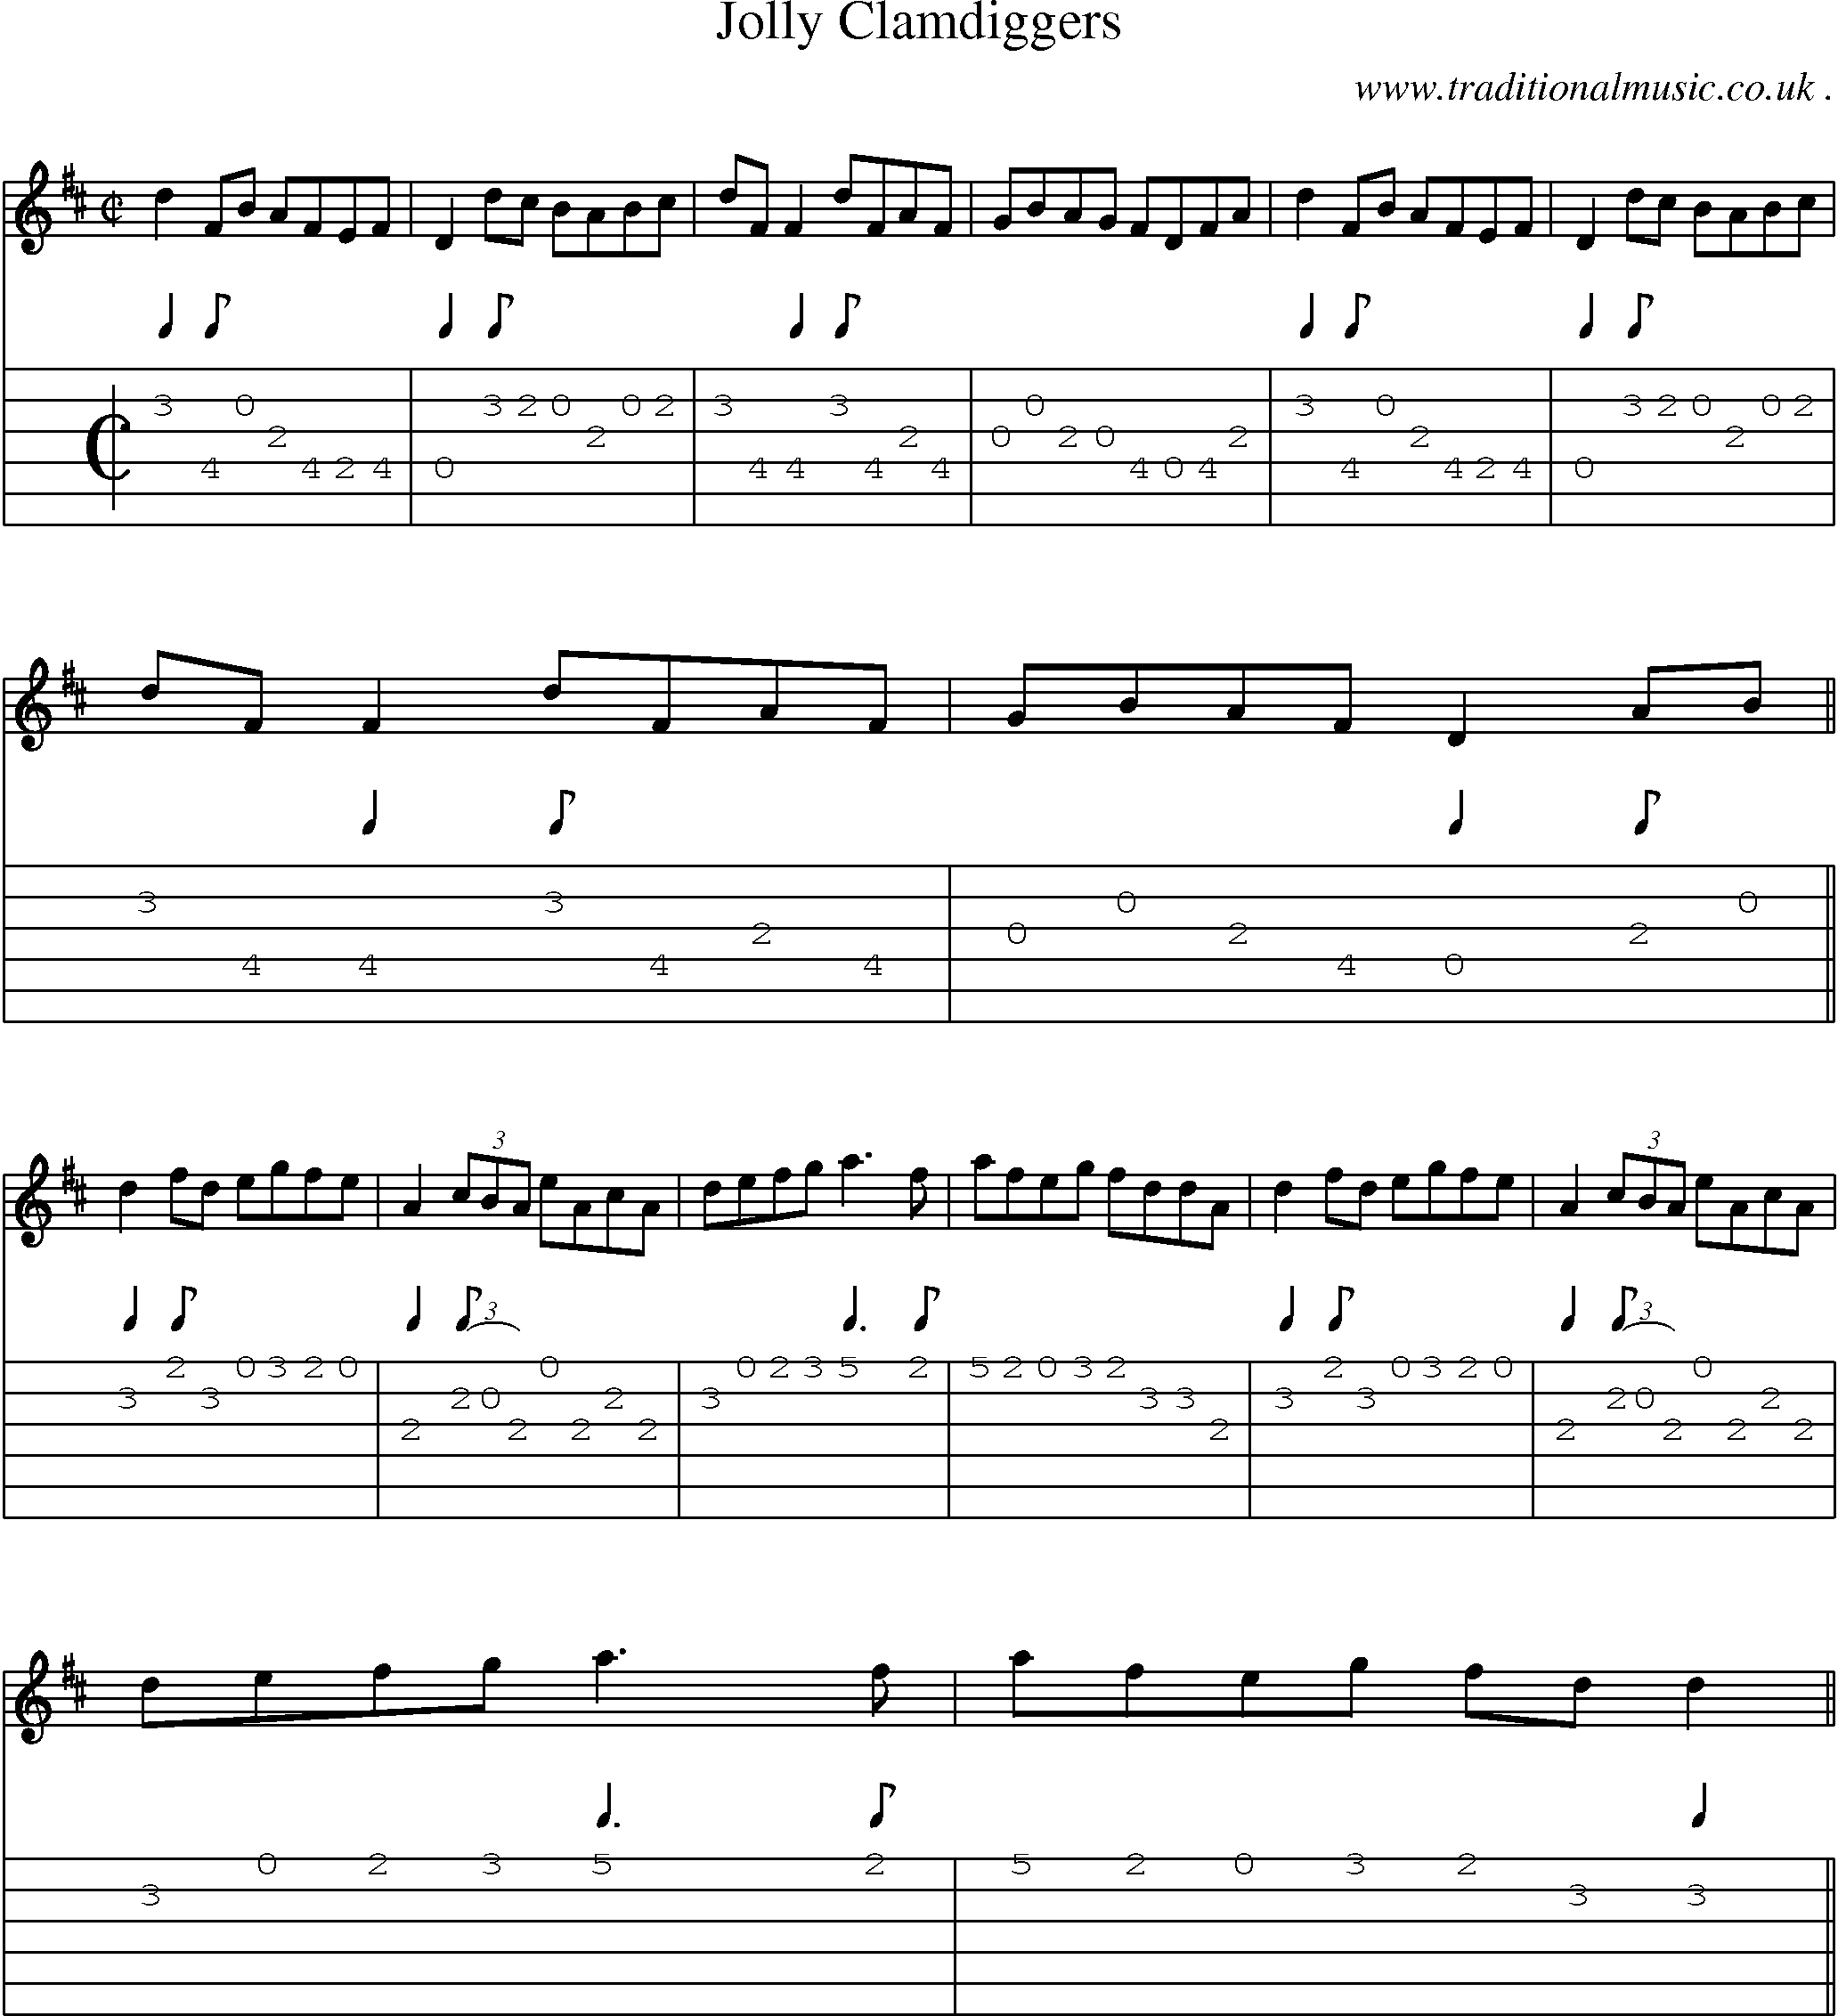 Sheet-Music and Guitar Tabs for Jolly Clamdiggers